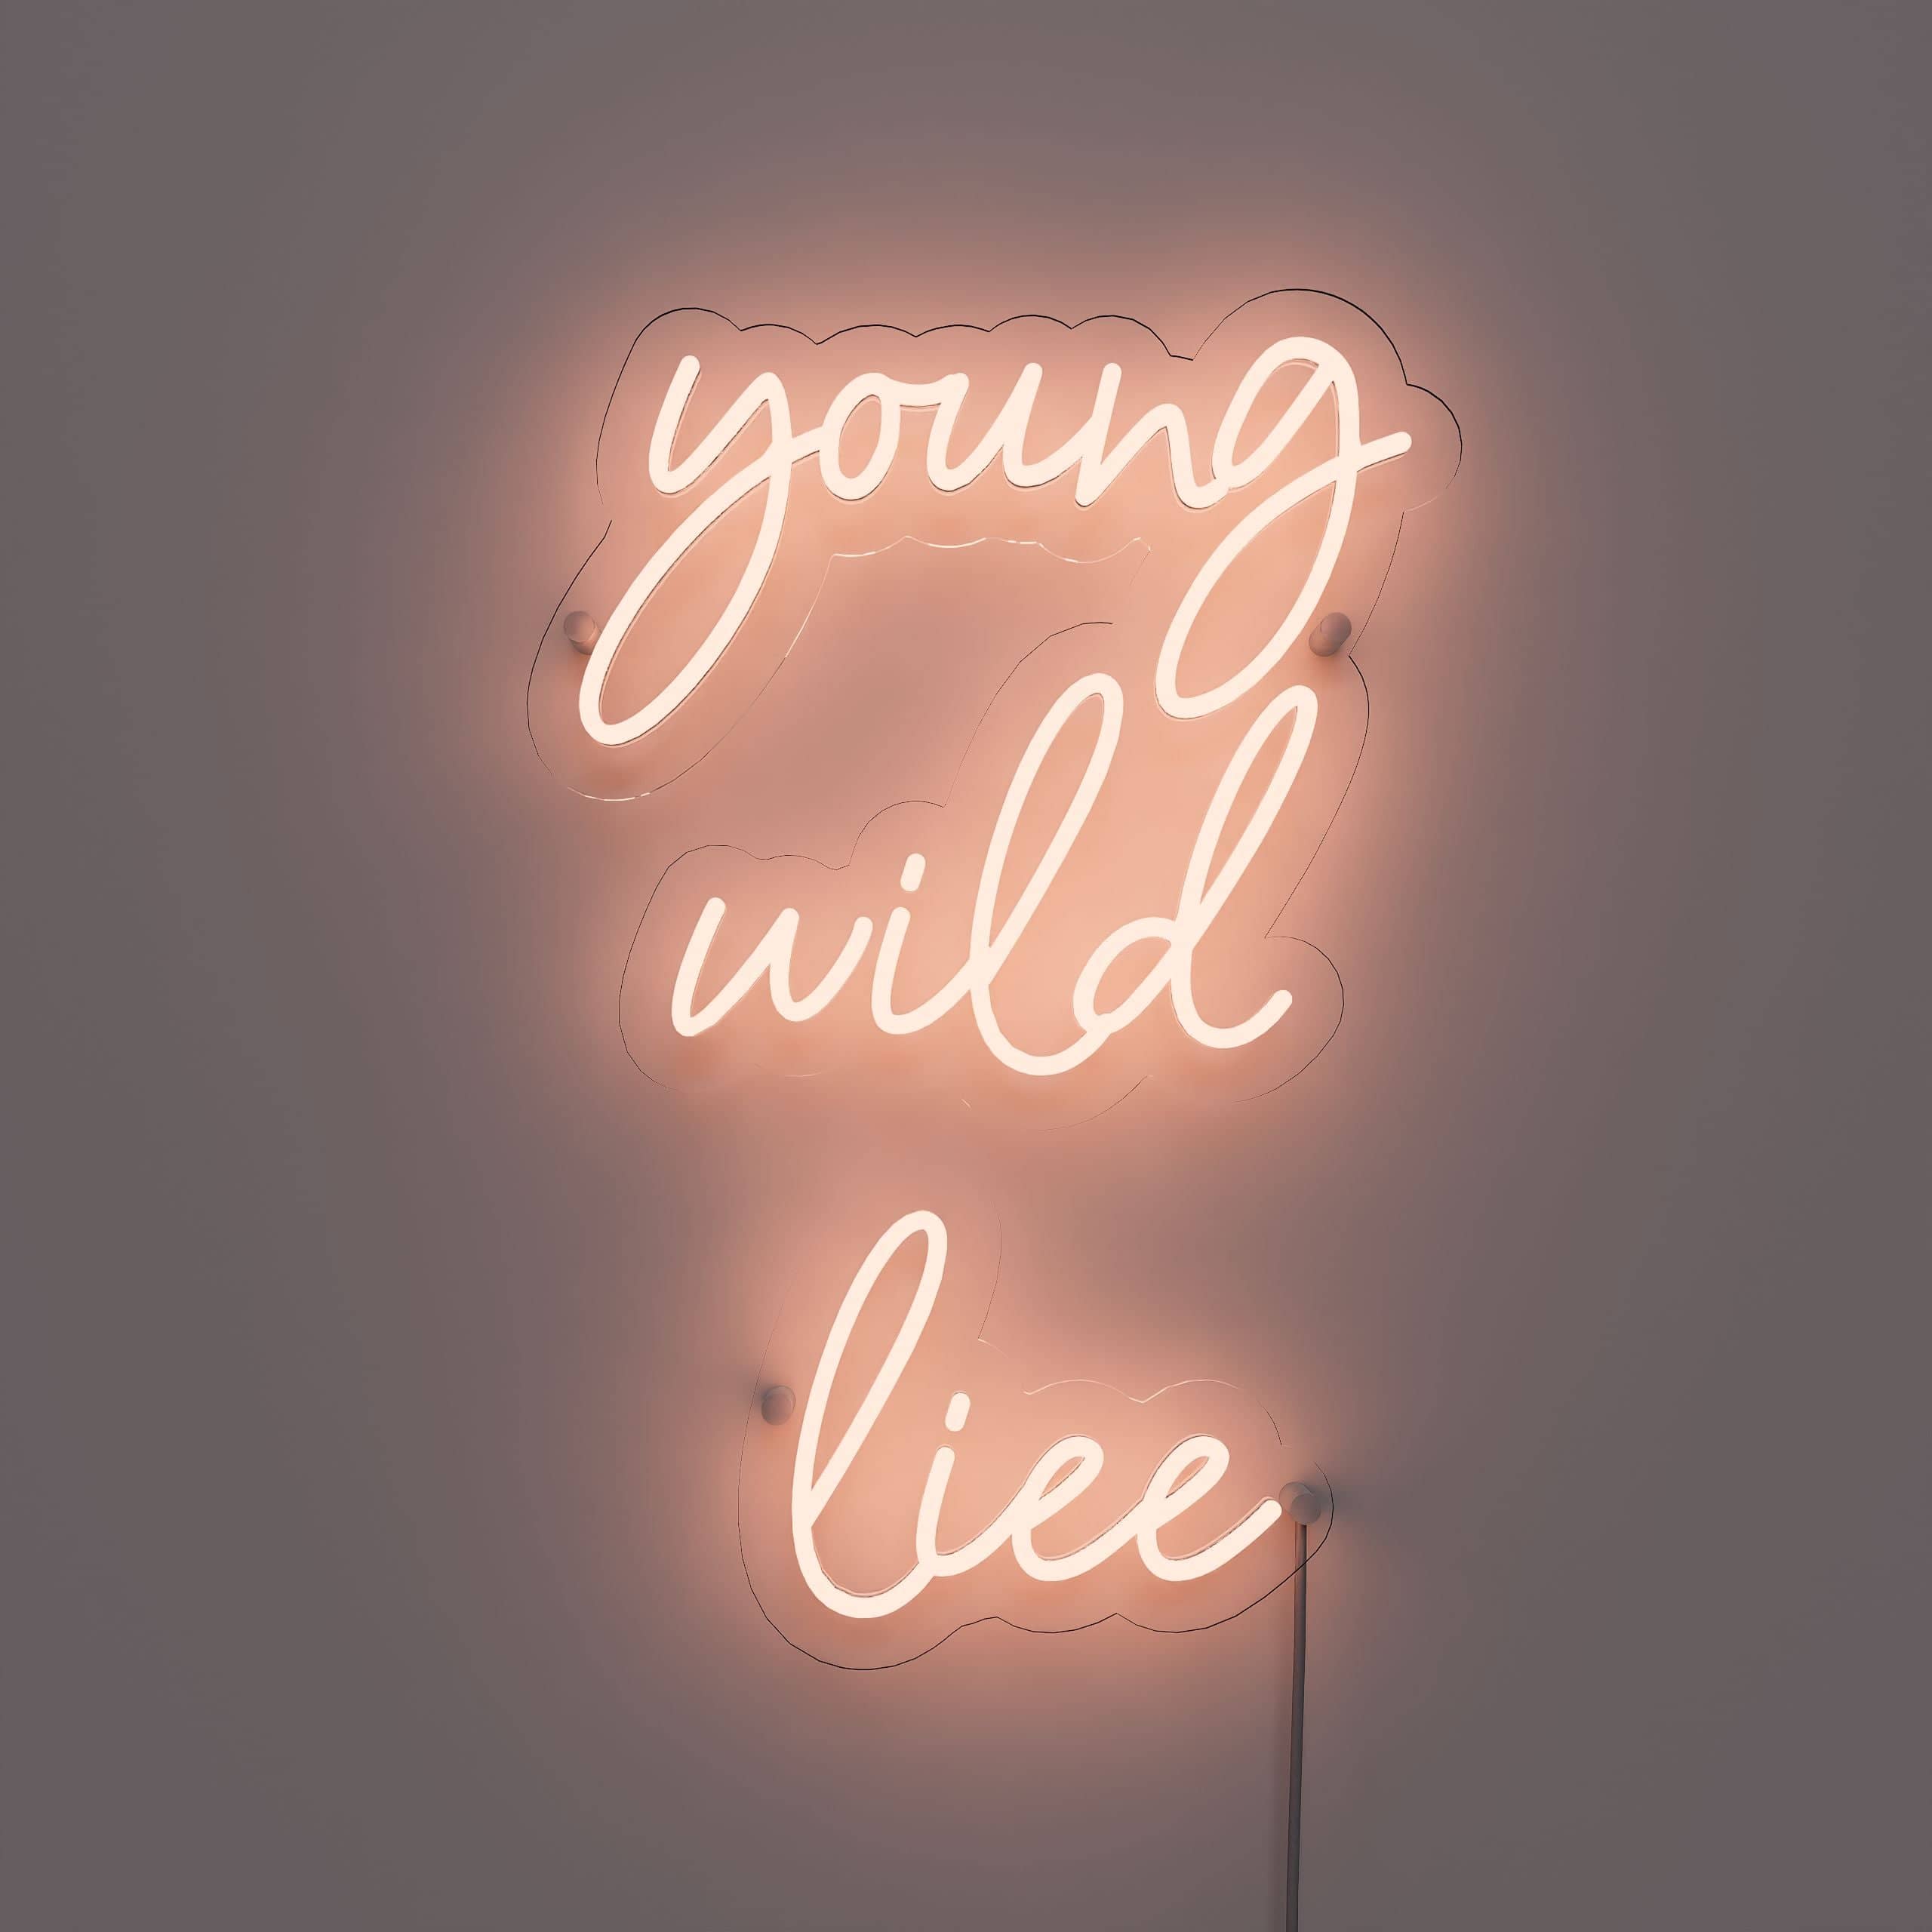 youthful,-untamed-and-living-life-to-the-fullest-neon-sign-lite